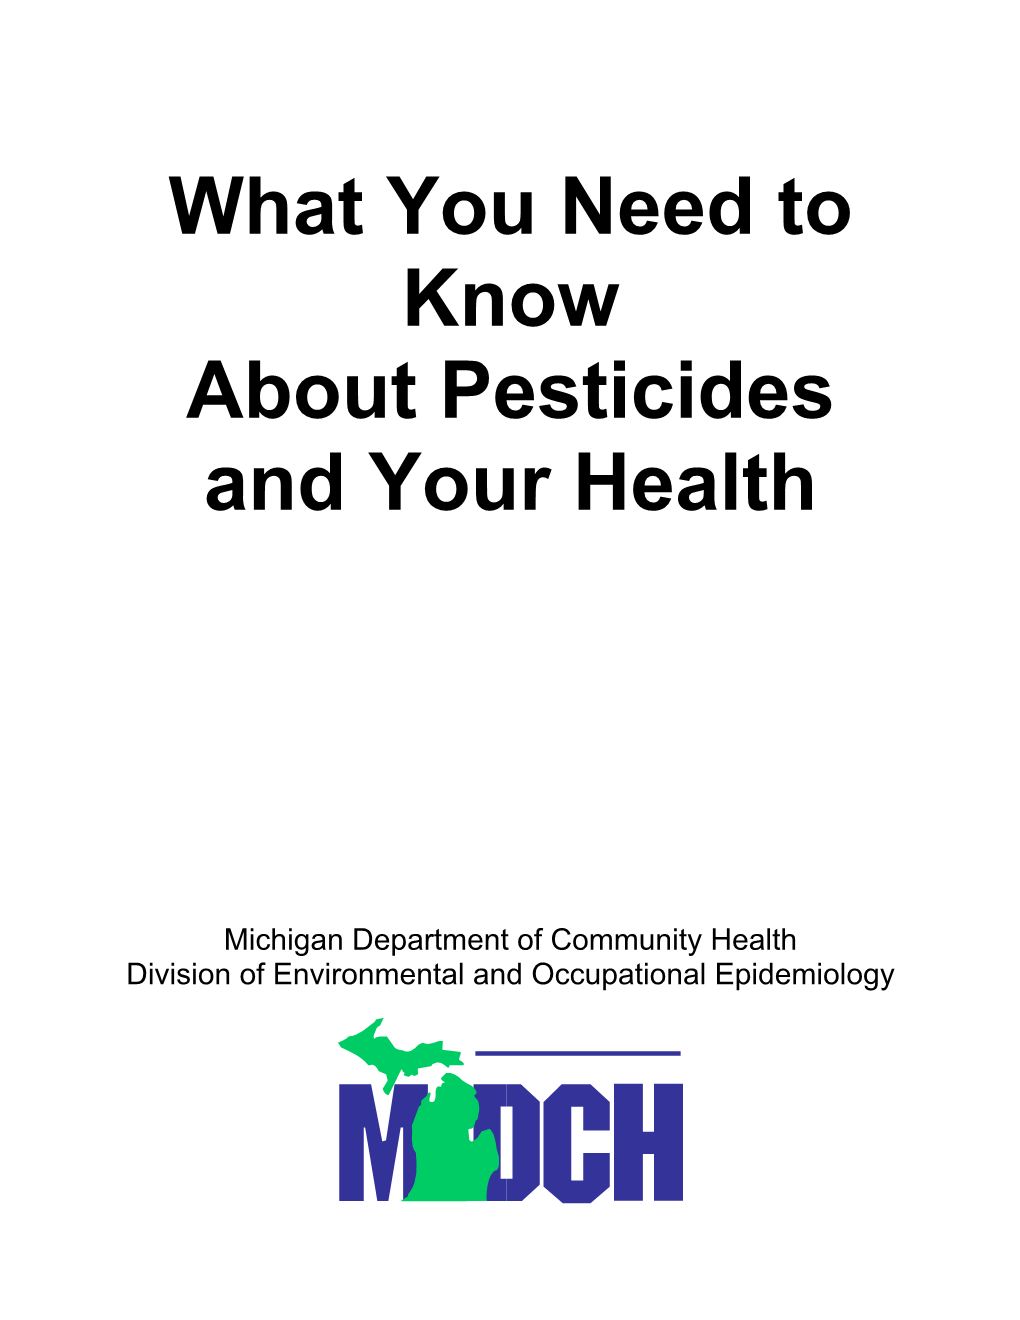 What You Need to Know About Pesticides and Your Health